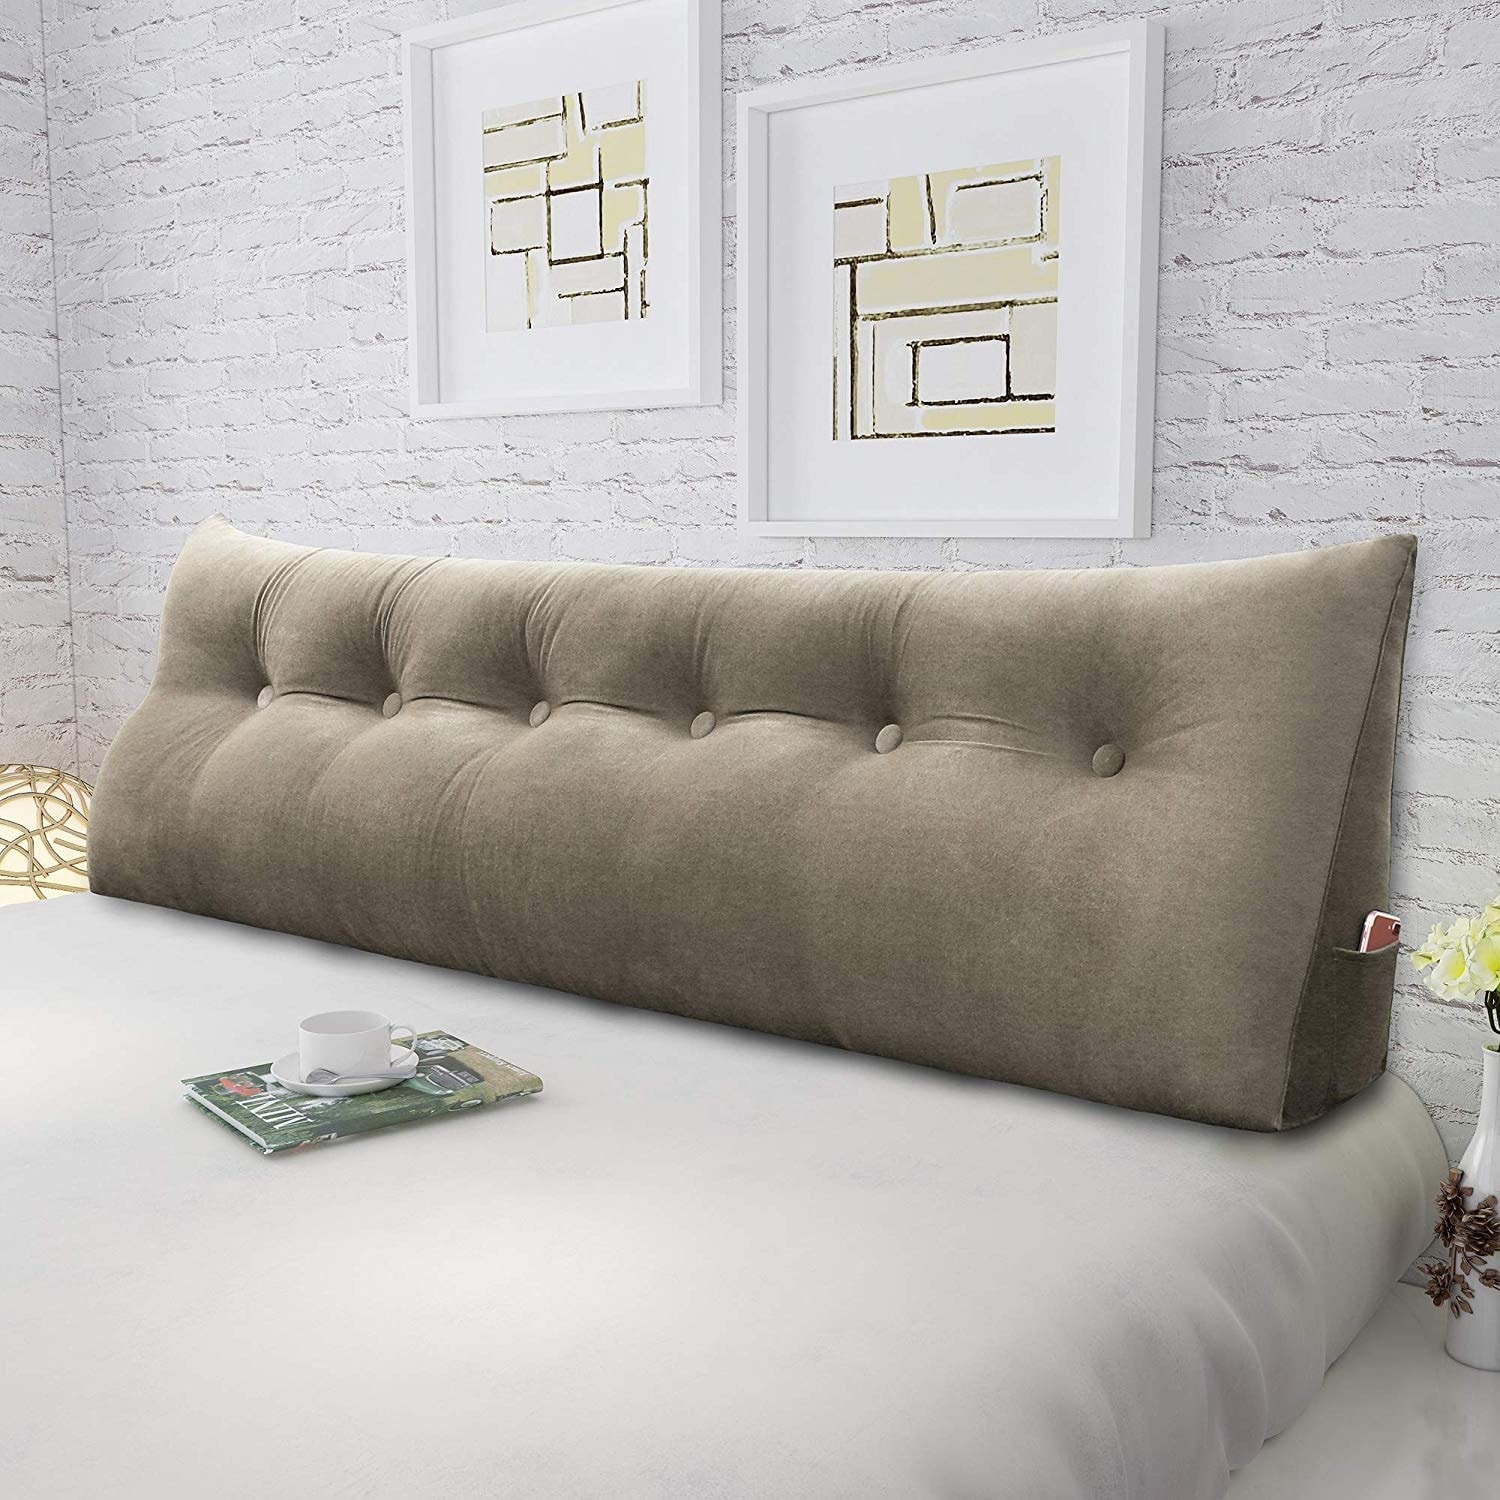 https://ak1.ostkcdn.com/images/products/is/images/direct/d3d21cbeeb5d18e033743c3094defb15372a0798/WOWMAX-Bed-Rest-Wedge-Reading-Pillow-Gray-Velvet-Bolster-Back-Support.jpg